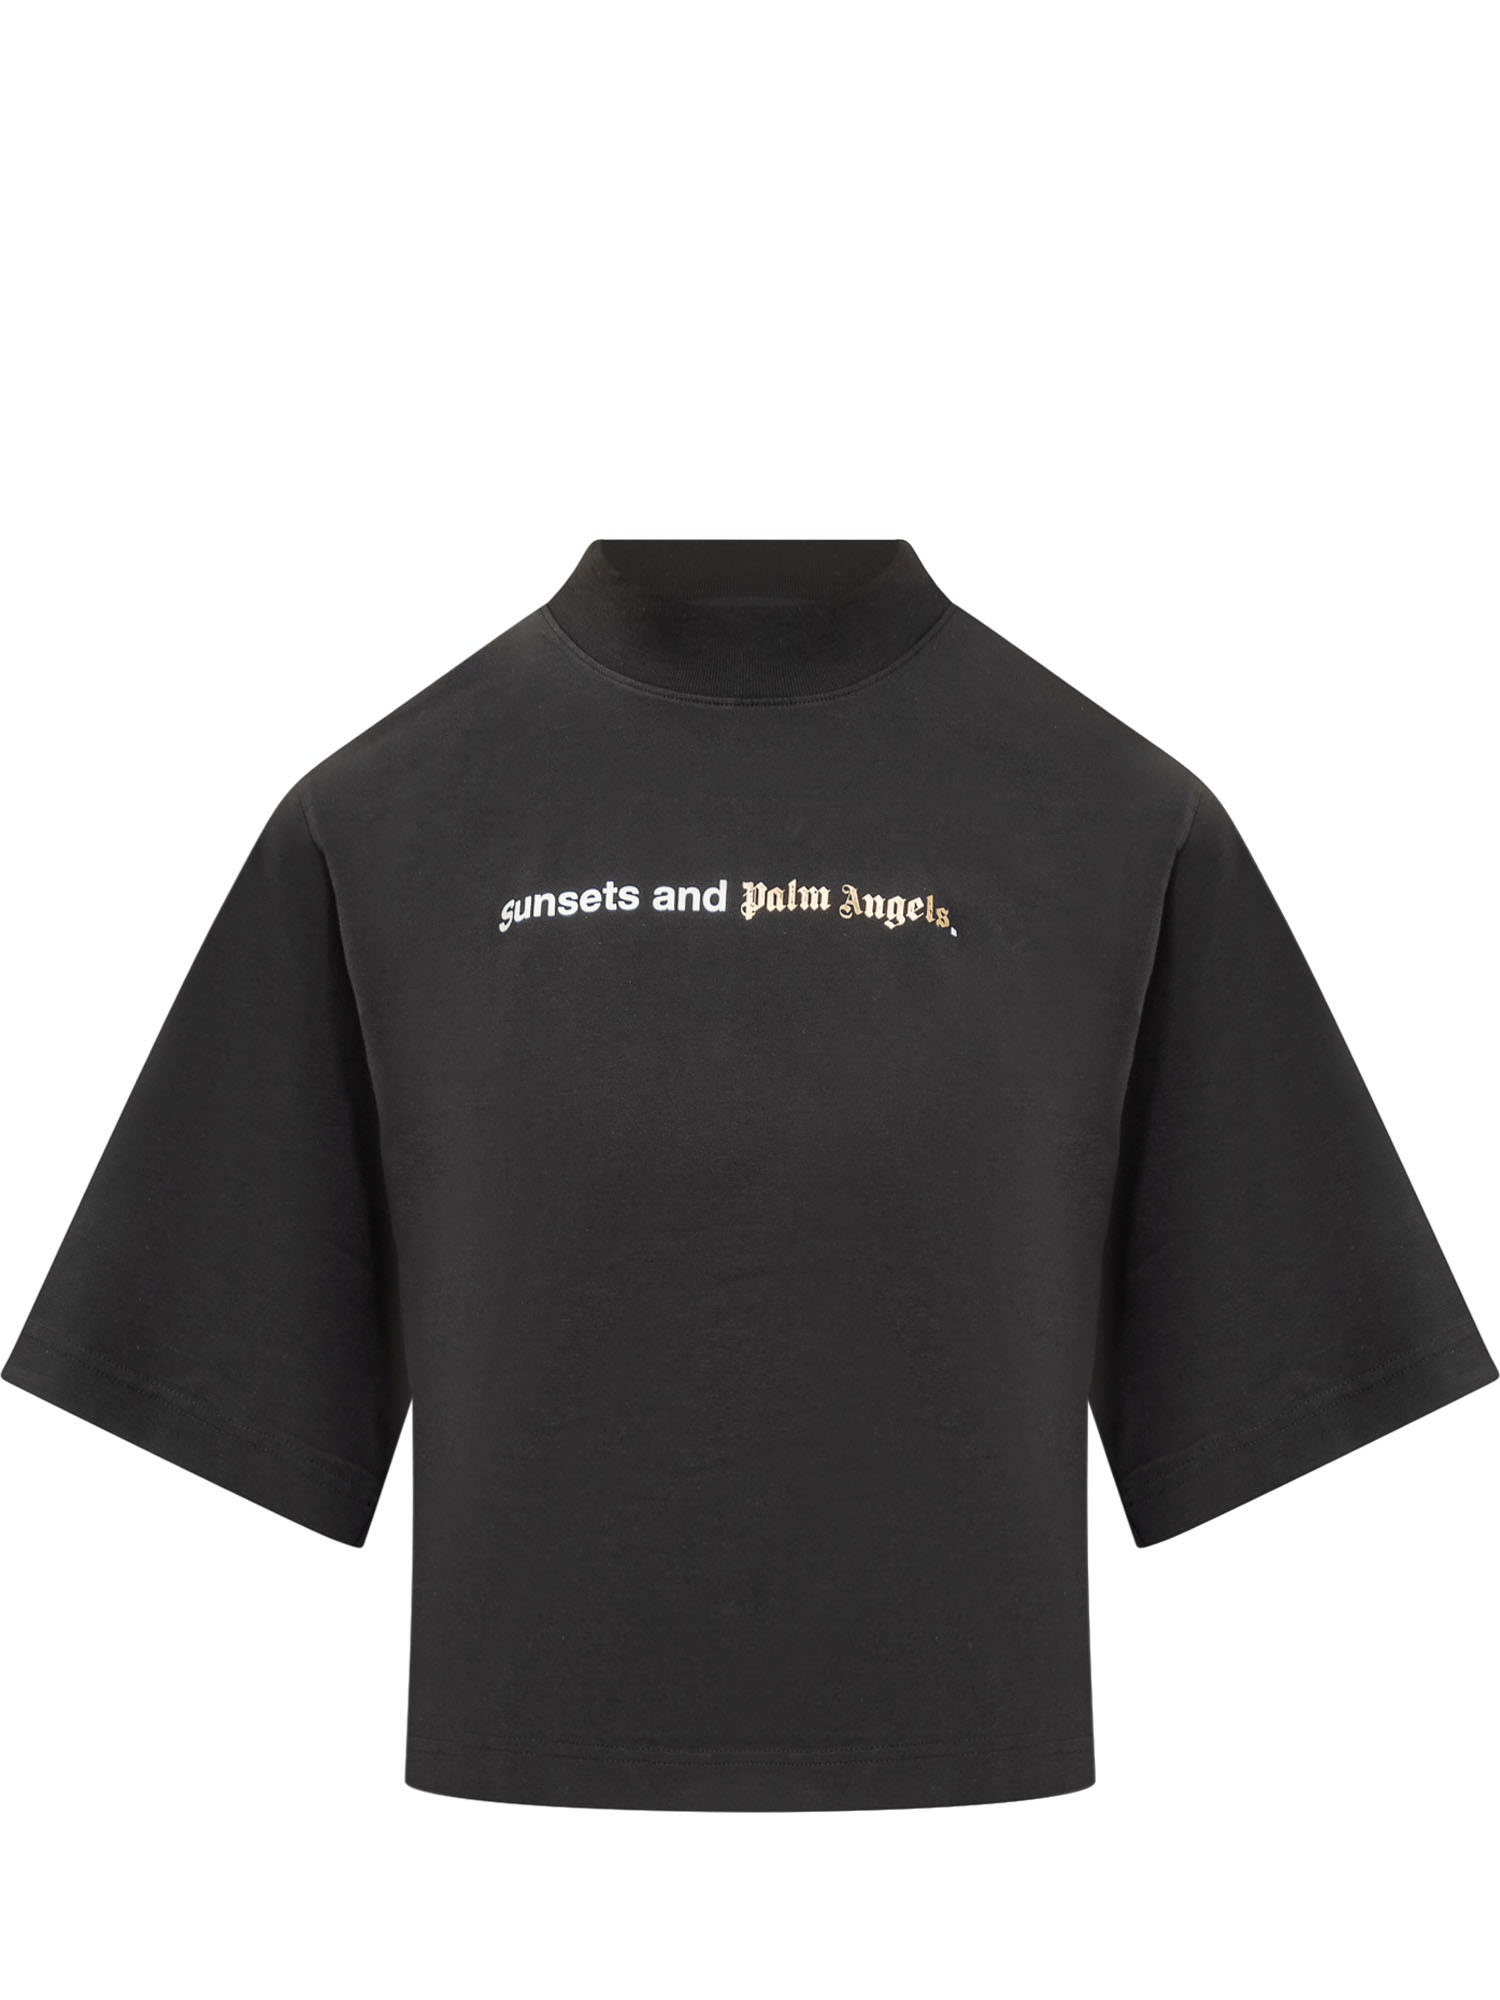 Palm Angels Sunsets T-shirt In Black White